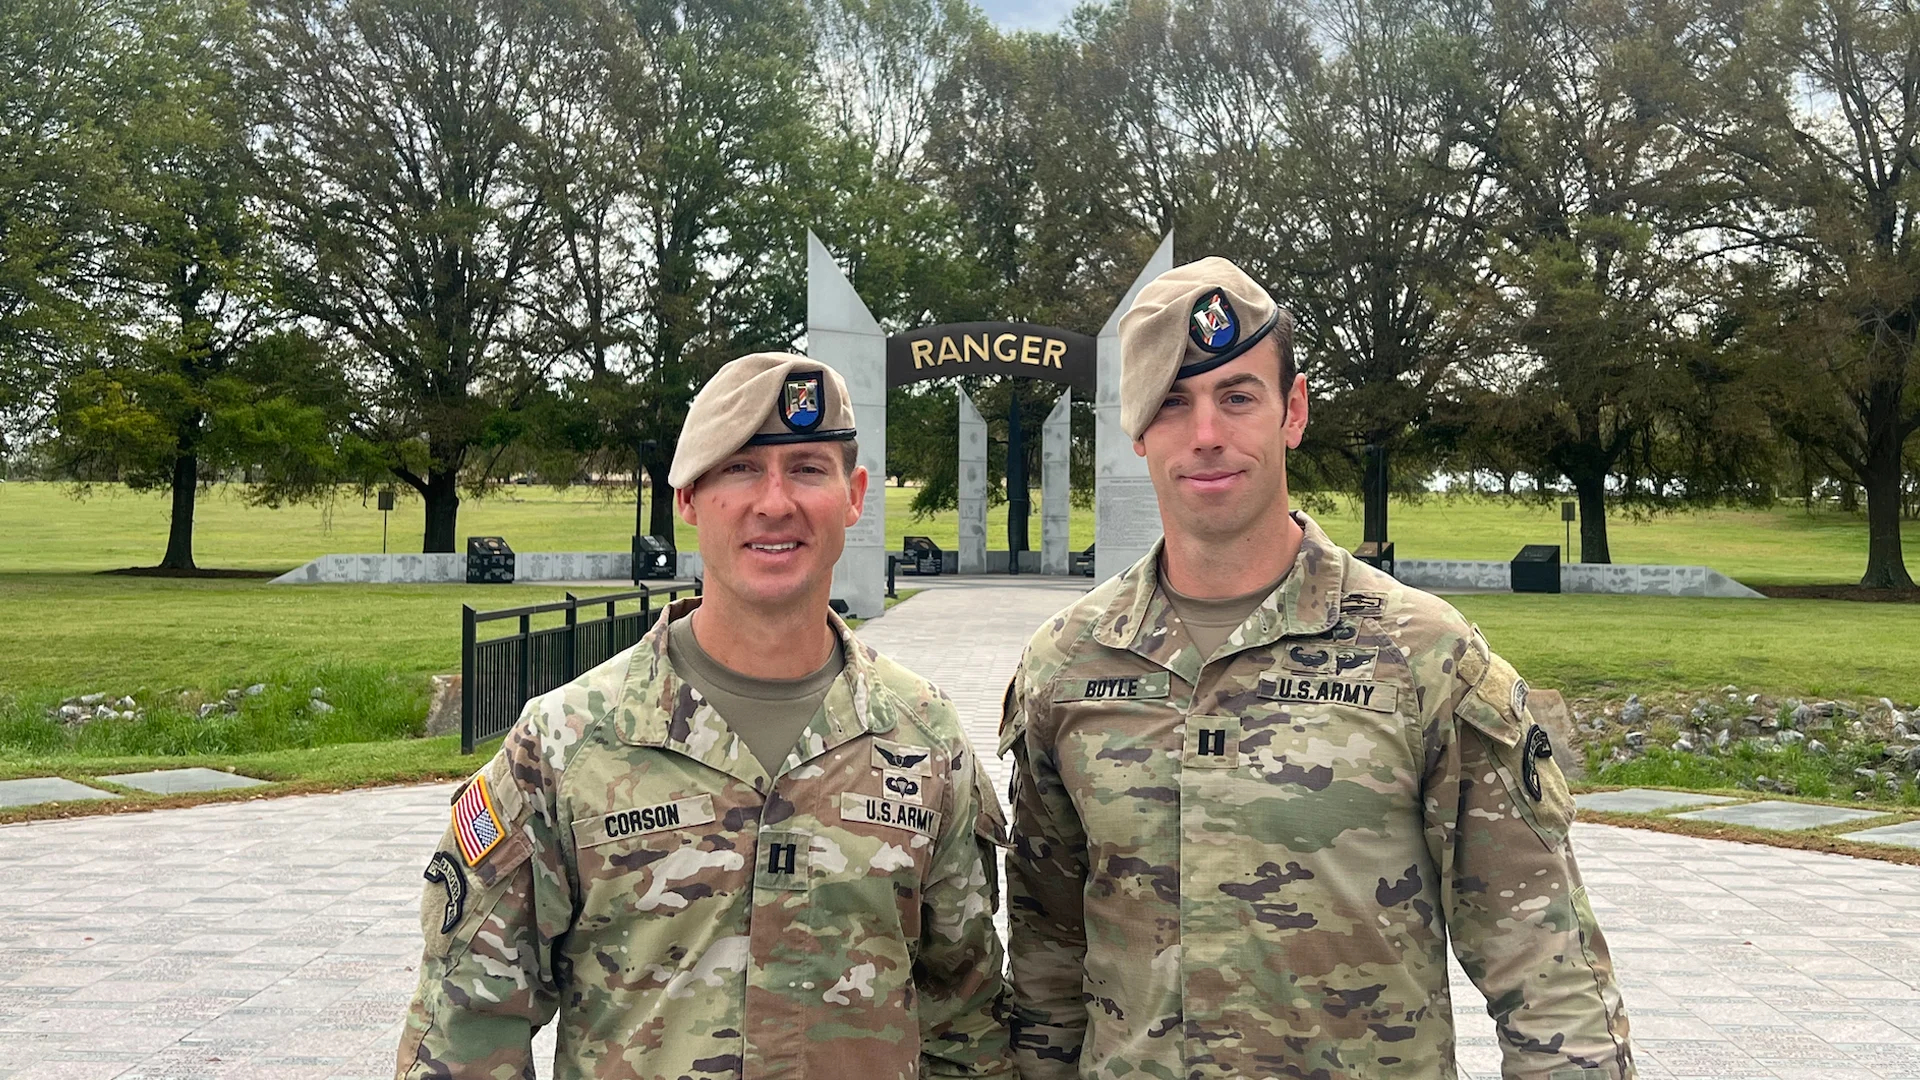 1920x1080 These 2 soldiers have been named the 'Best Rangers' of 2022